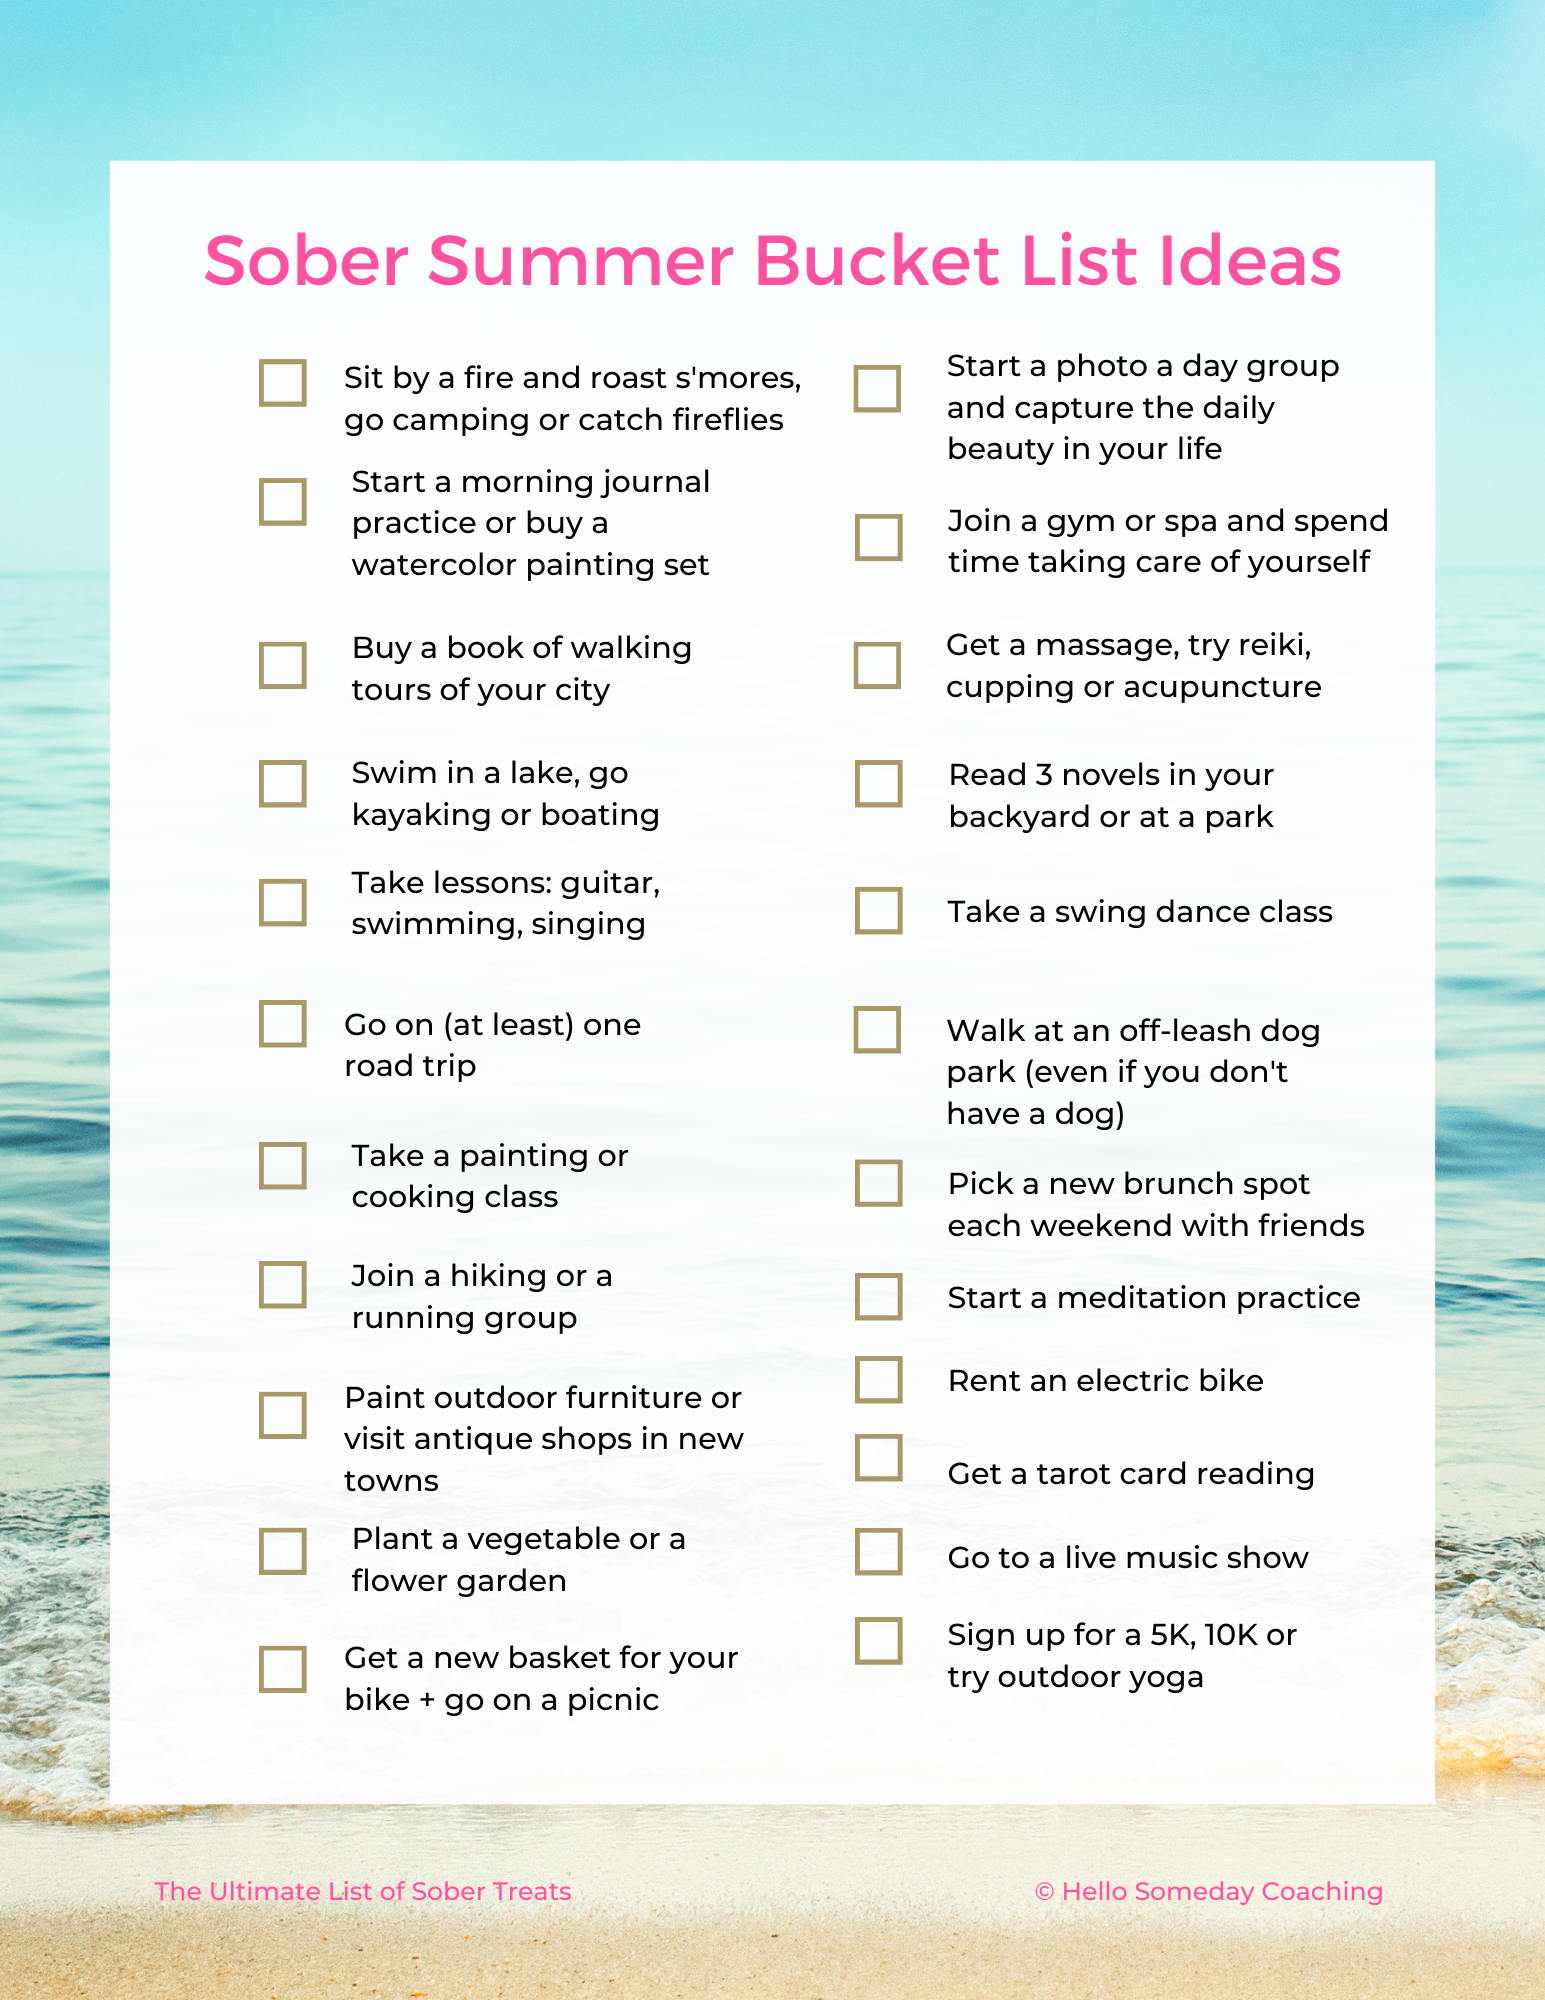  23 Alcohol-Free Fun Ideas For Your Dry July and Sober Summer Bucket List For Women Quitting Drinking - Join The Sobriety Starter Kit Course